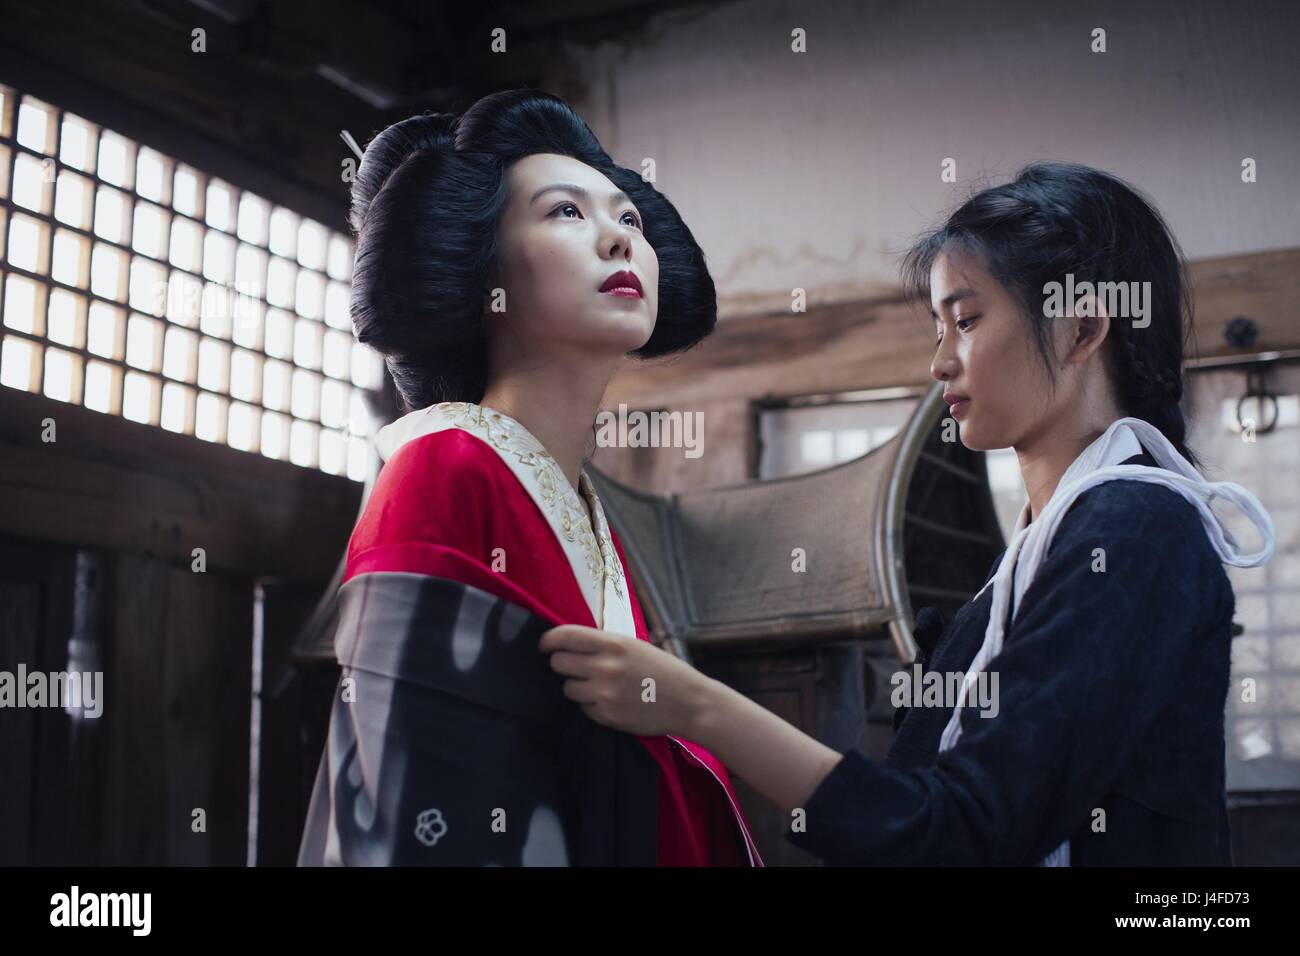 The Handmaiden  Ah-ga-ssi  Year : 2016 South Korea  Director : Chan-wook Park  Min-hee Kim, Kim Tae-ri   Photo: Jae-Hyeok Lee.  It is forbidden to reproduce the photograph out of context of the promotion of the film. It must be credited to the Film Company and/or the photographer assigned by or authorized by/allowed on the set by the Film Company. Restricted to Editorial Use. Photo12 does not grant publicity rights of the persons represented. Stock Photo